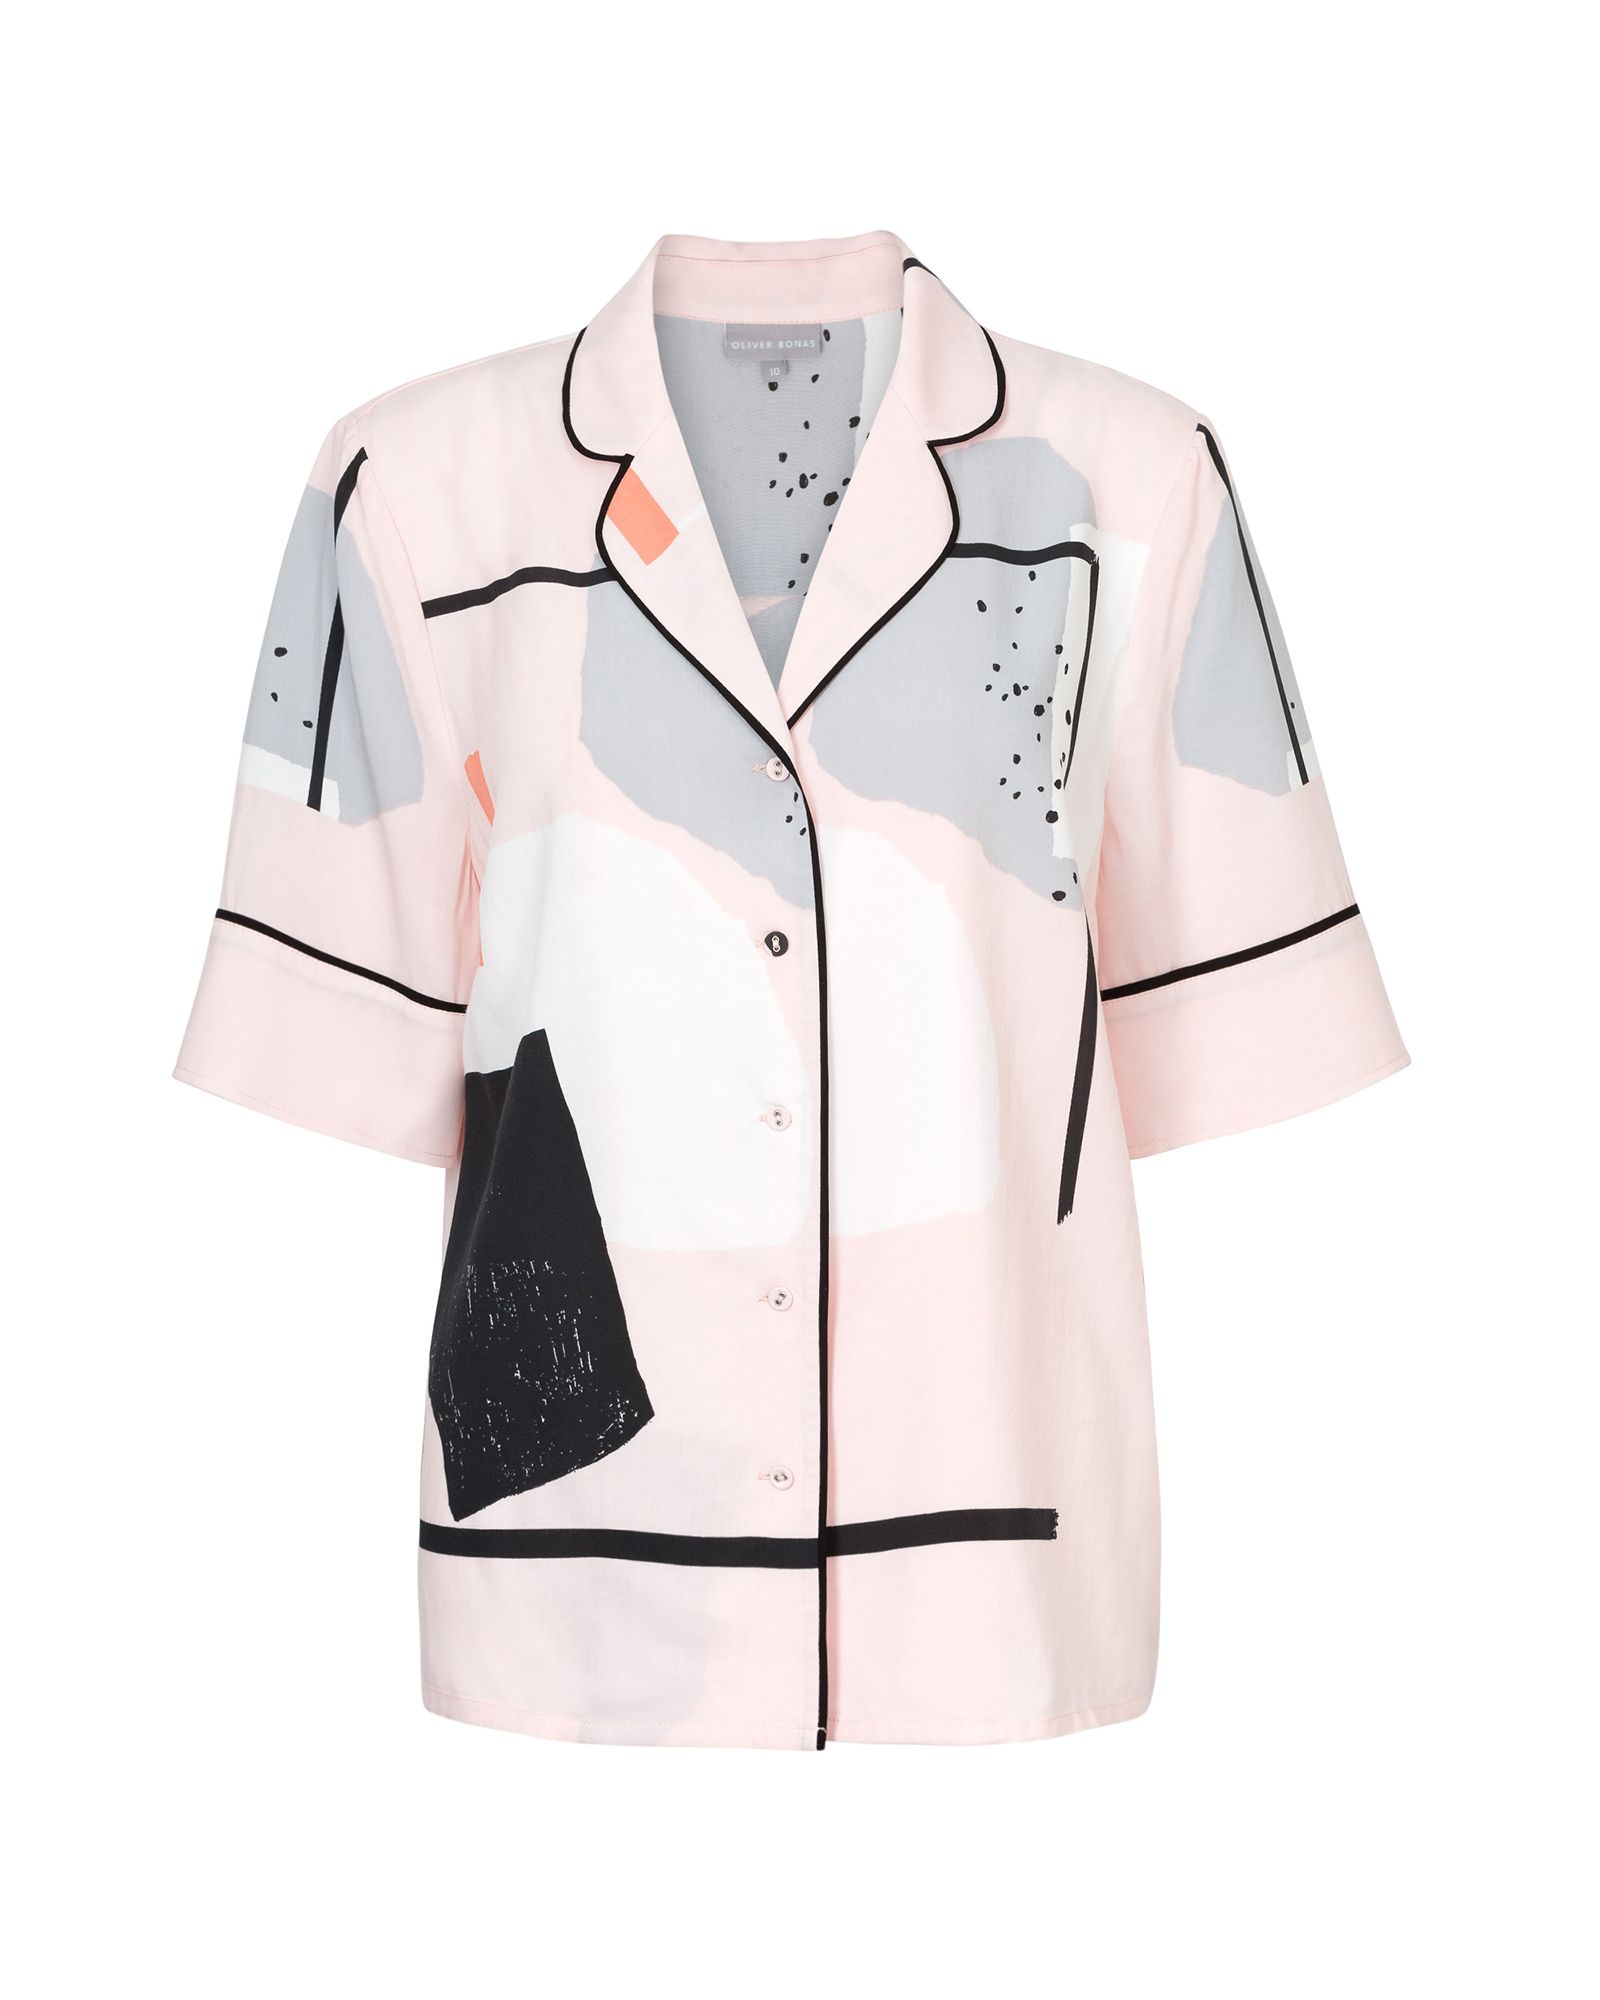 Gallery Print Relaxed Shirt | Oliver Bonas